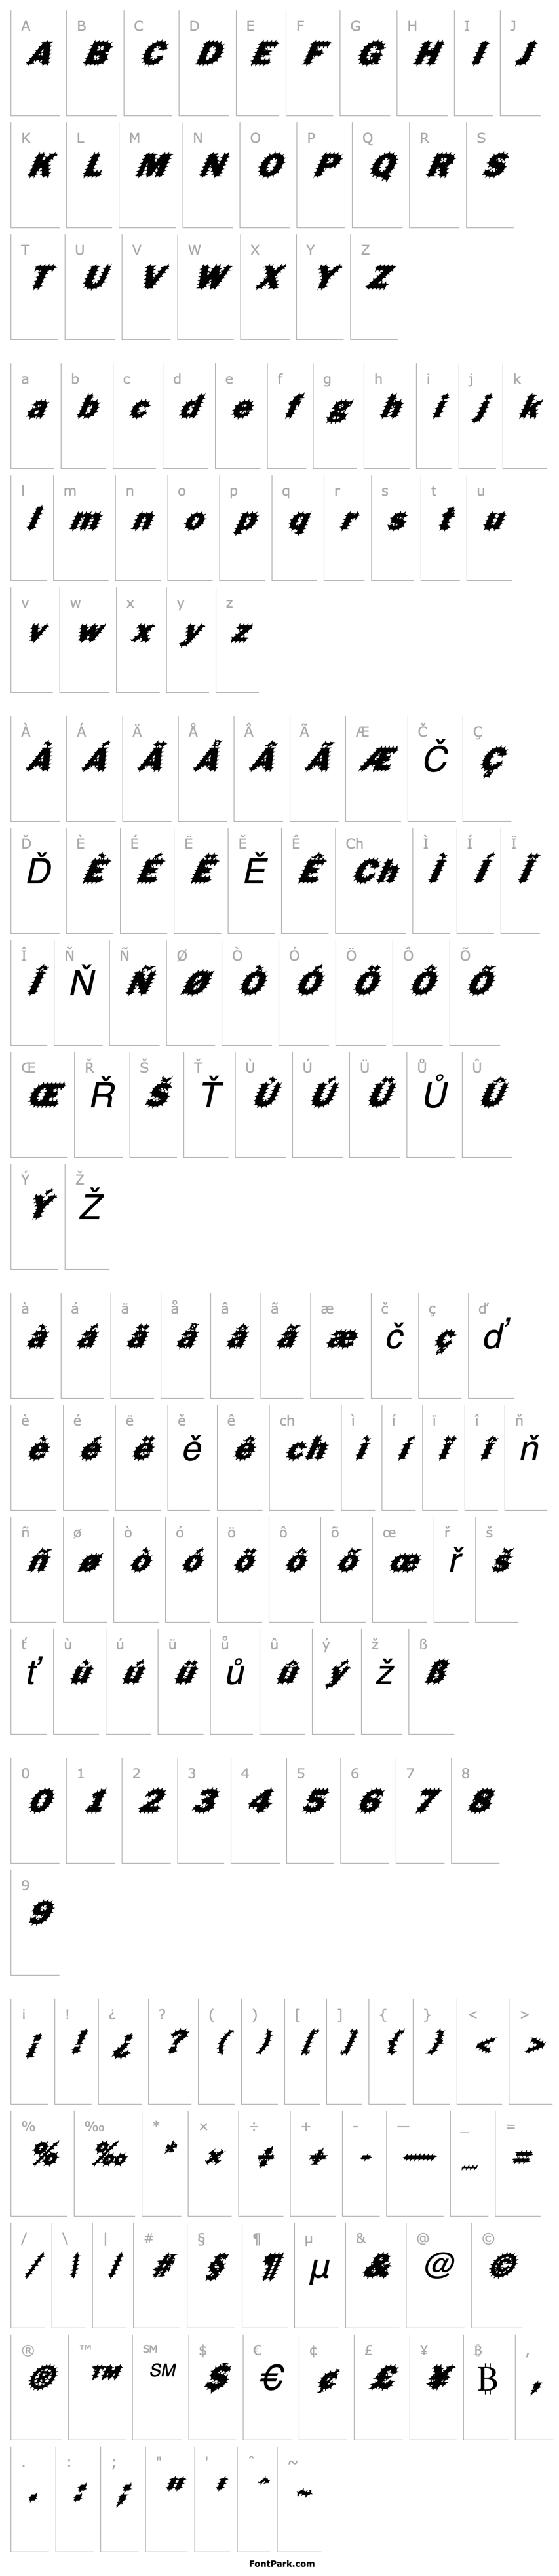 Overview FZ BASIC 56 SPIKED ITALIC